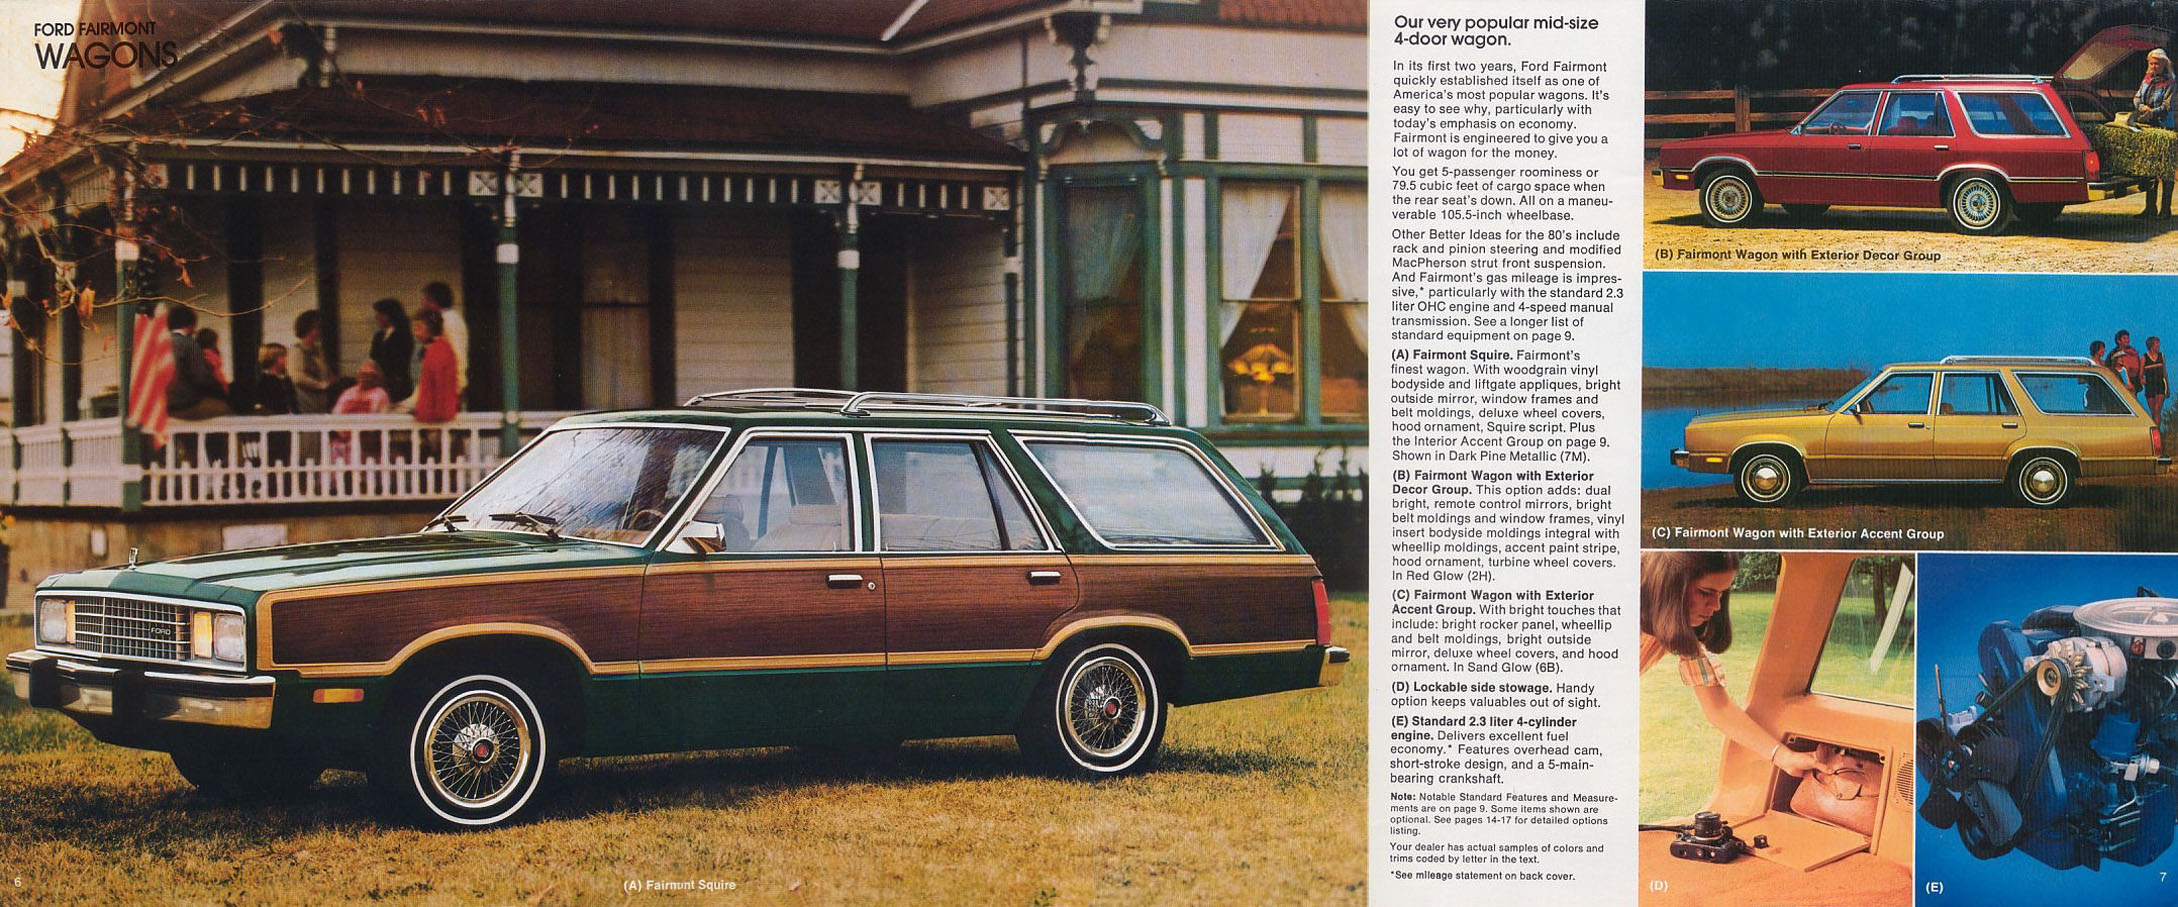 1980_Ford_Wagons-04